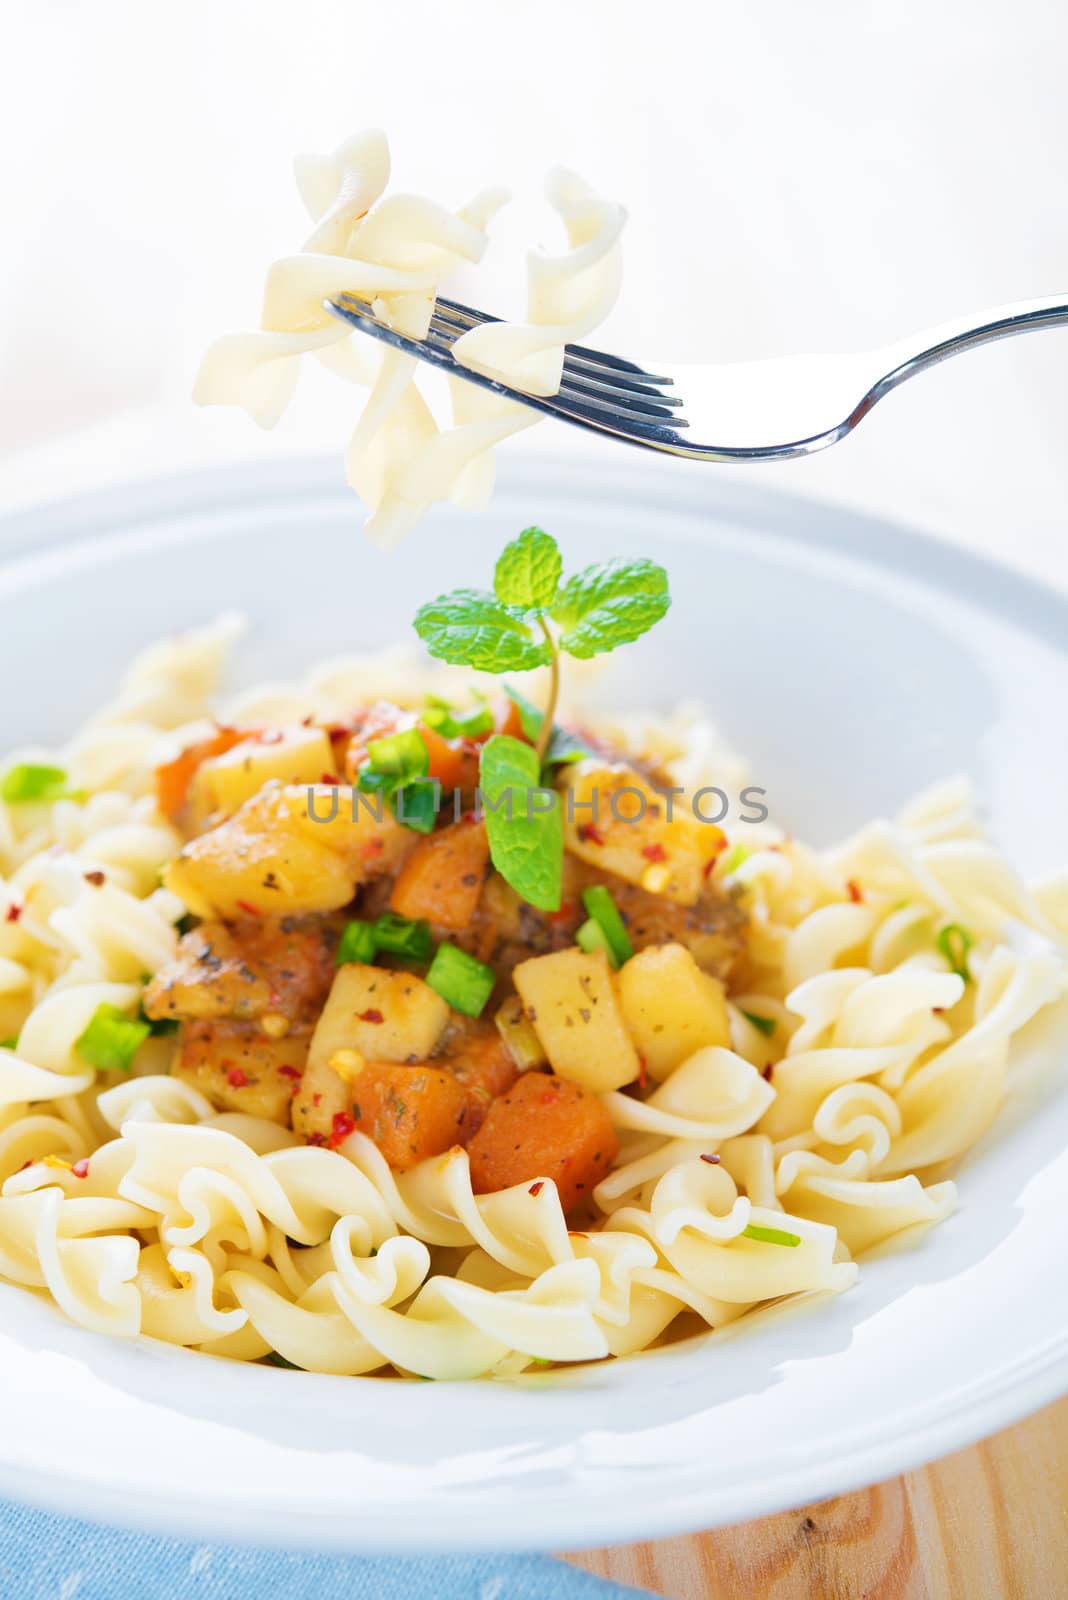 Delicious pasta fusilli with potatoes, carrot and tomatoes on the kitchen table